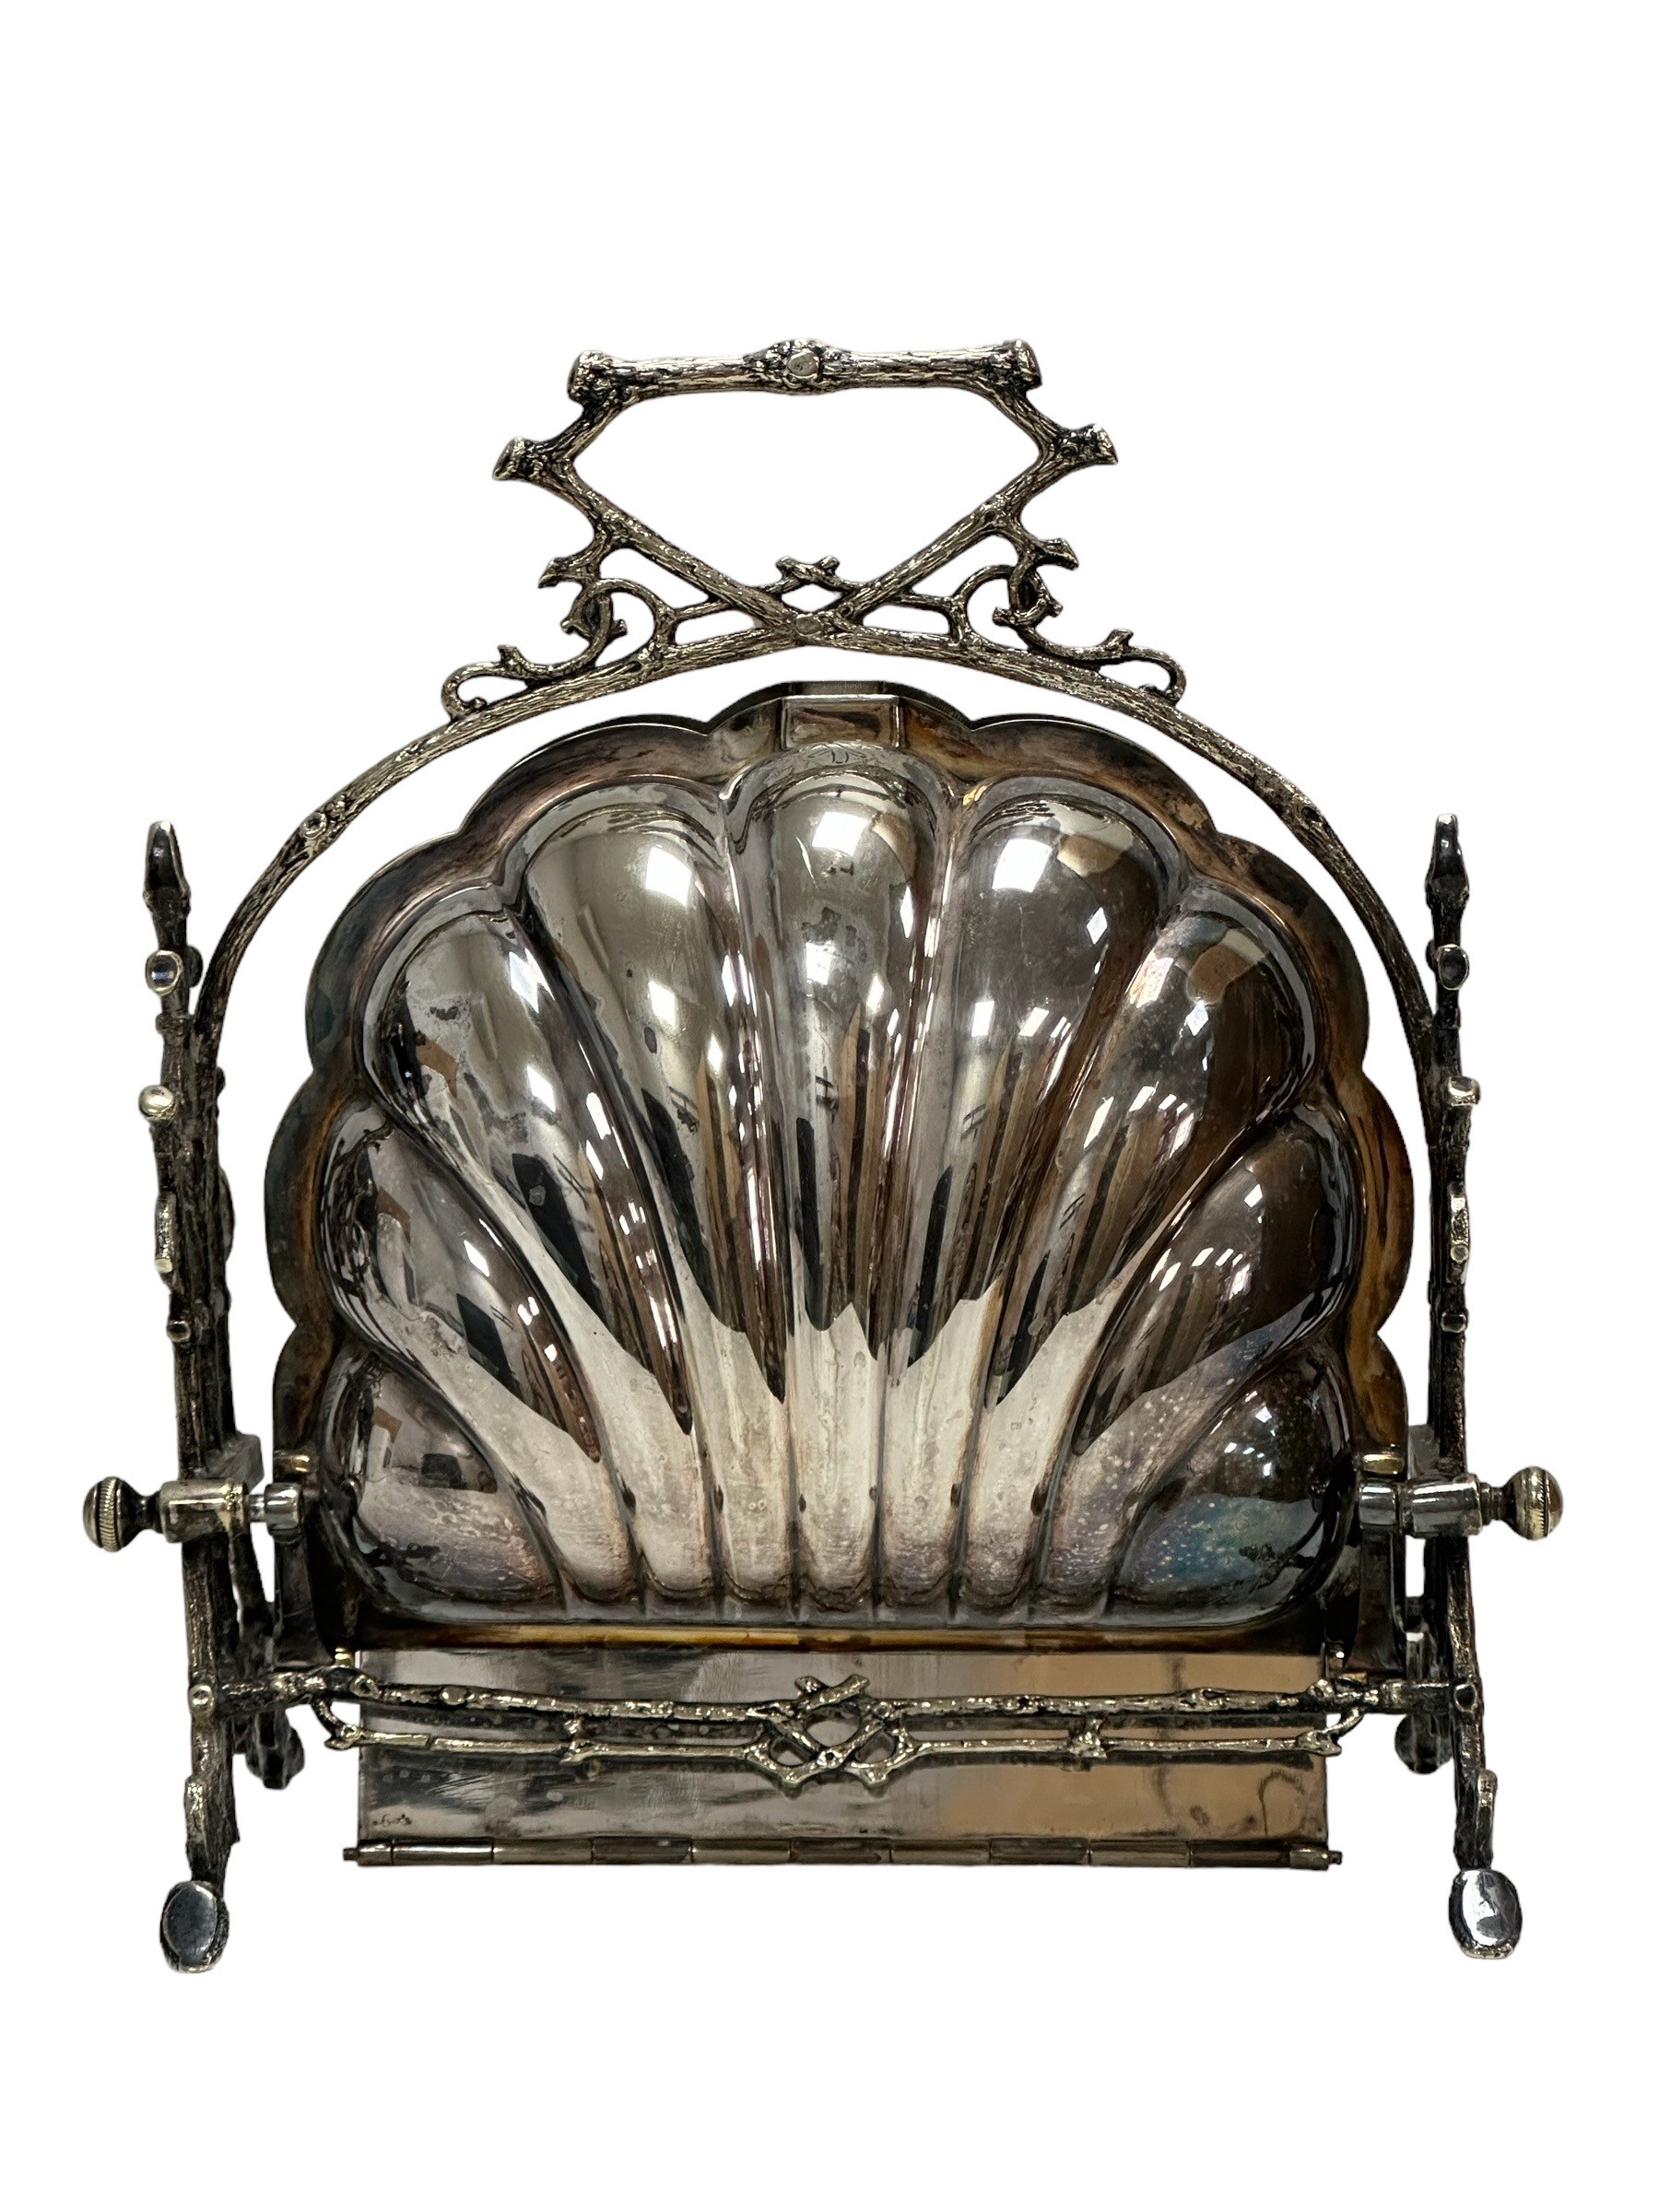 A Victorian silver plated clam shell muffin warmer by the Fenton Brothers of Sheffield. Laurel - Image 3 of 4